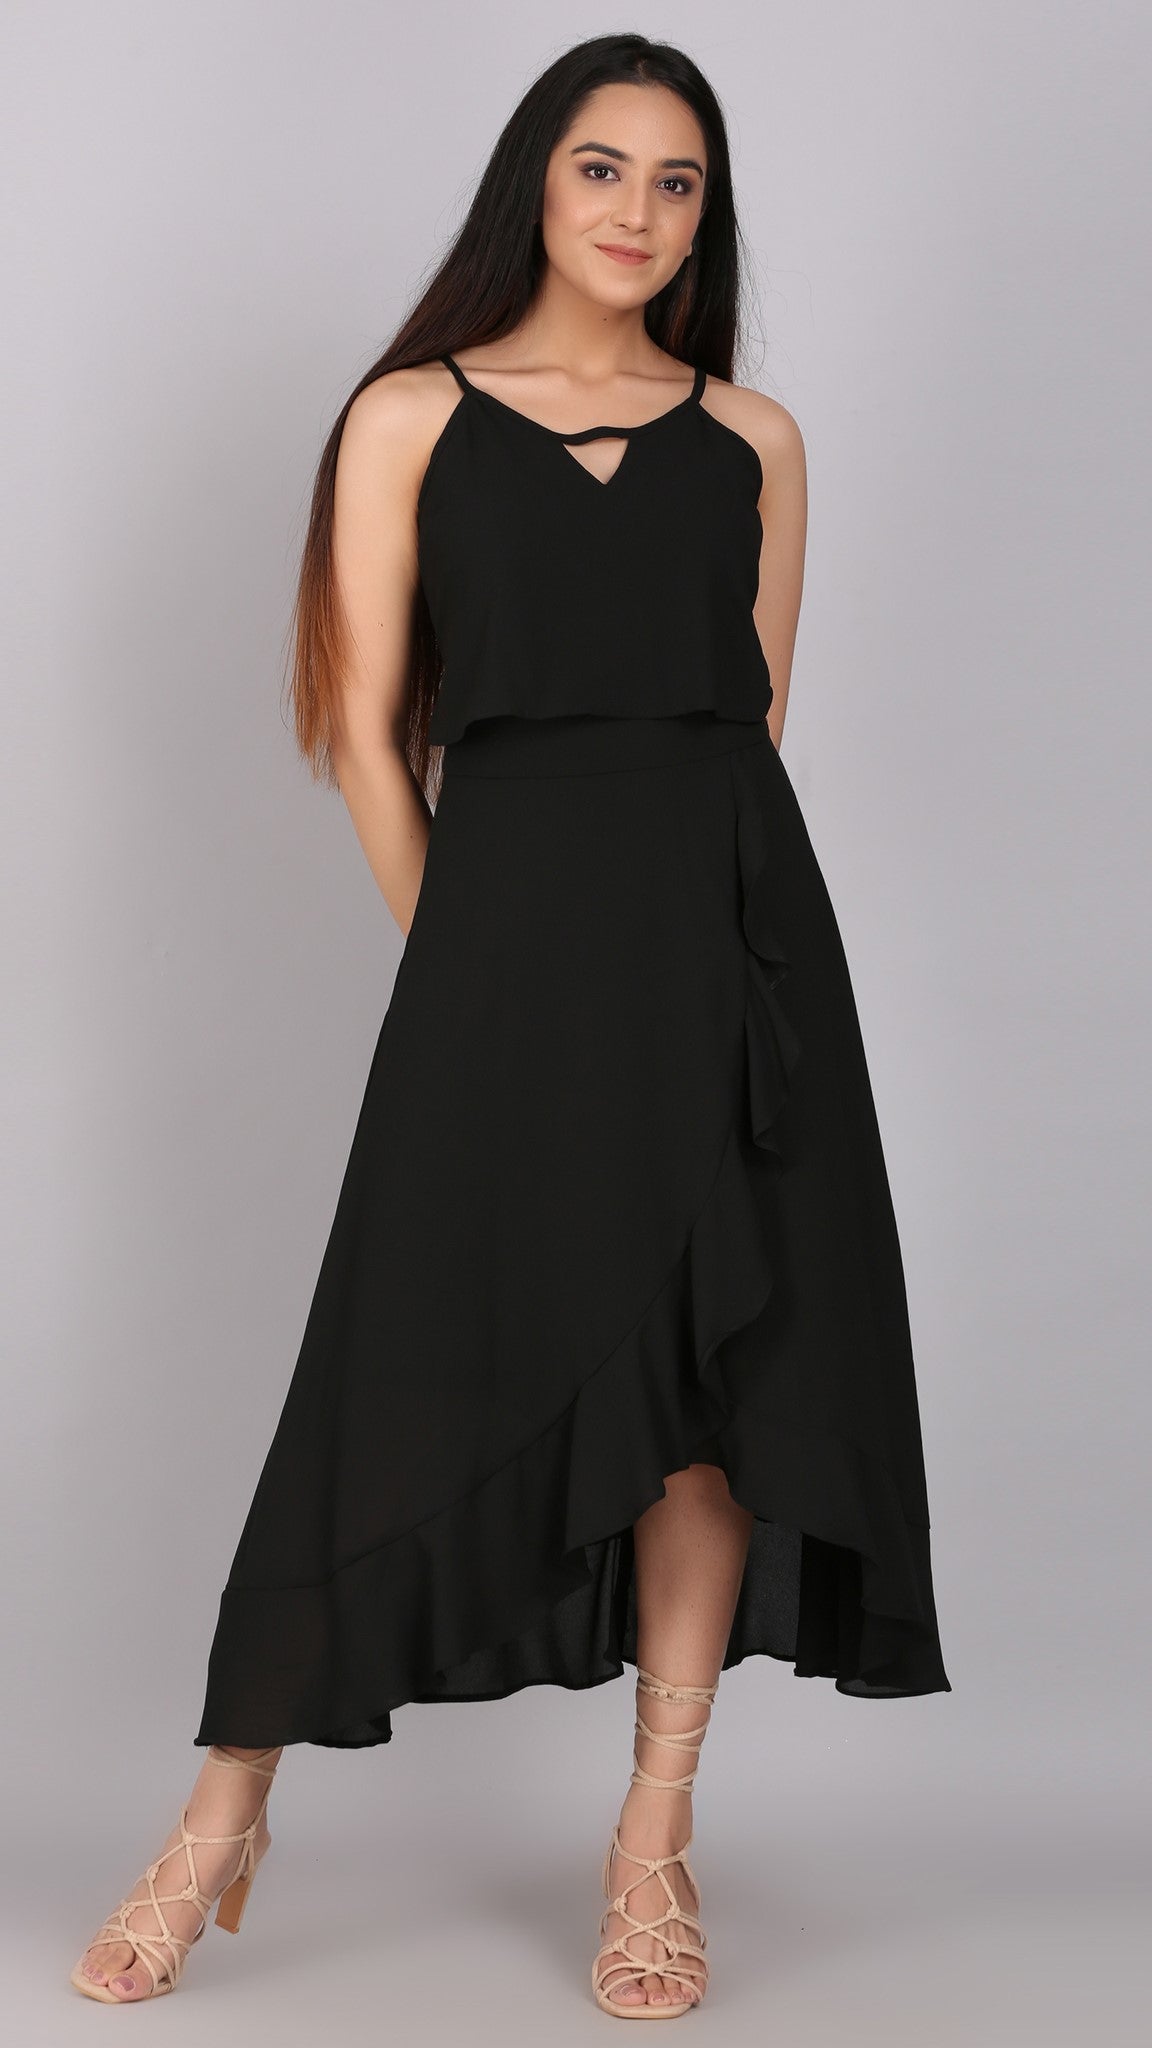 Details more than 132 black frill dress latest